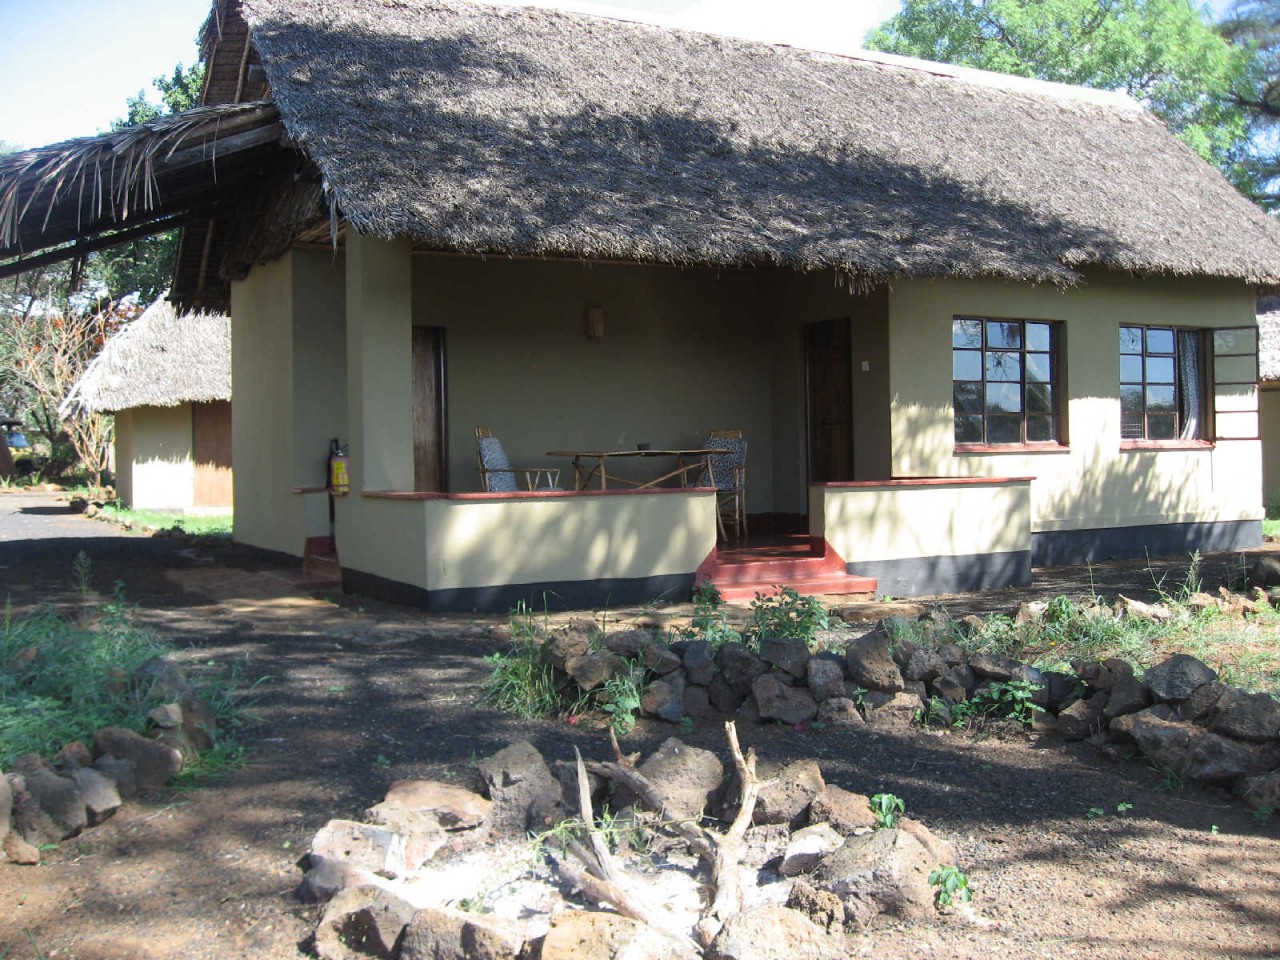 Budget accommodation in Tsavo west national park